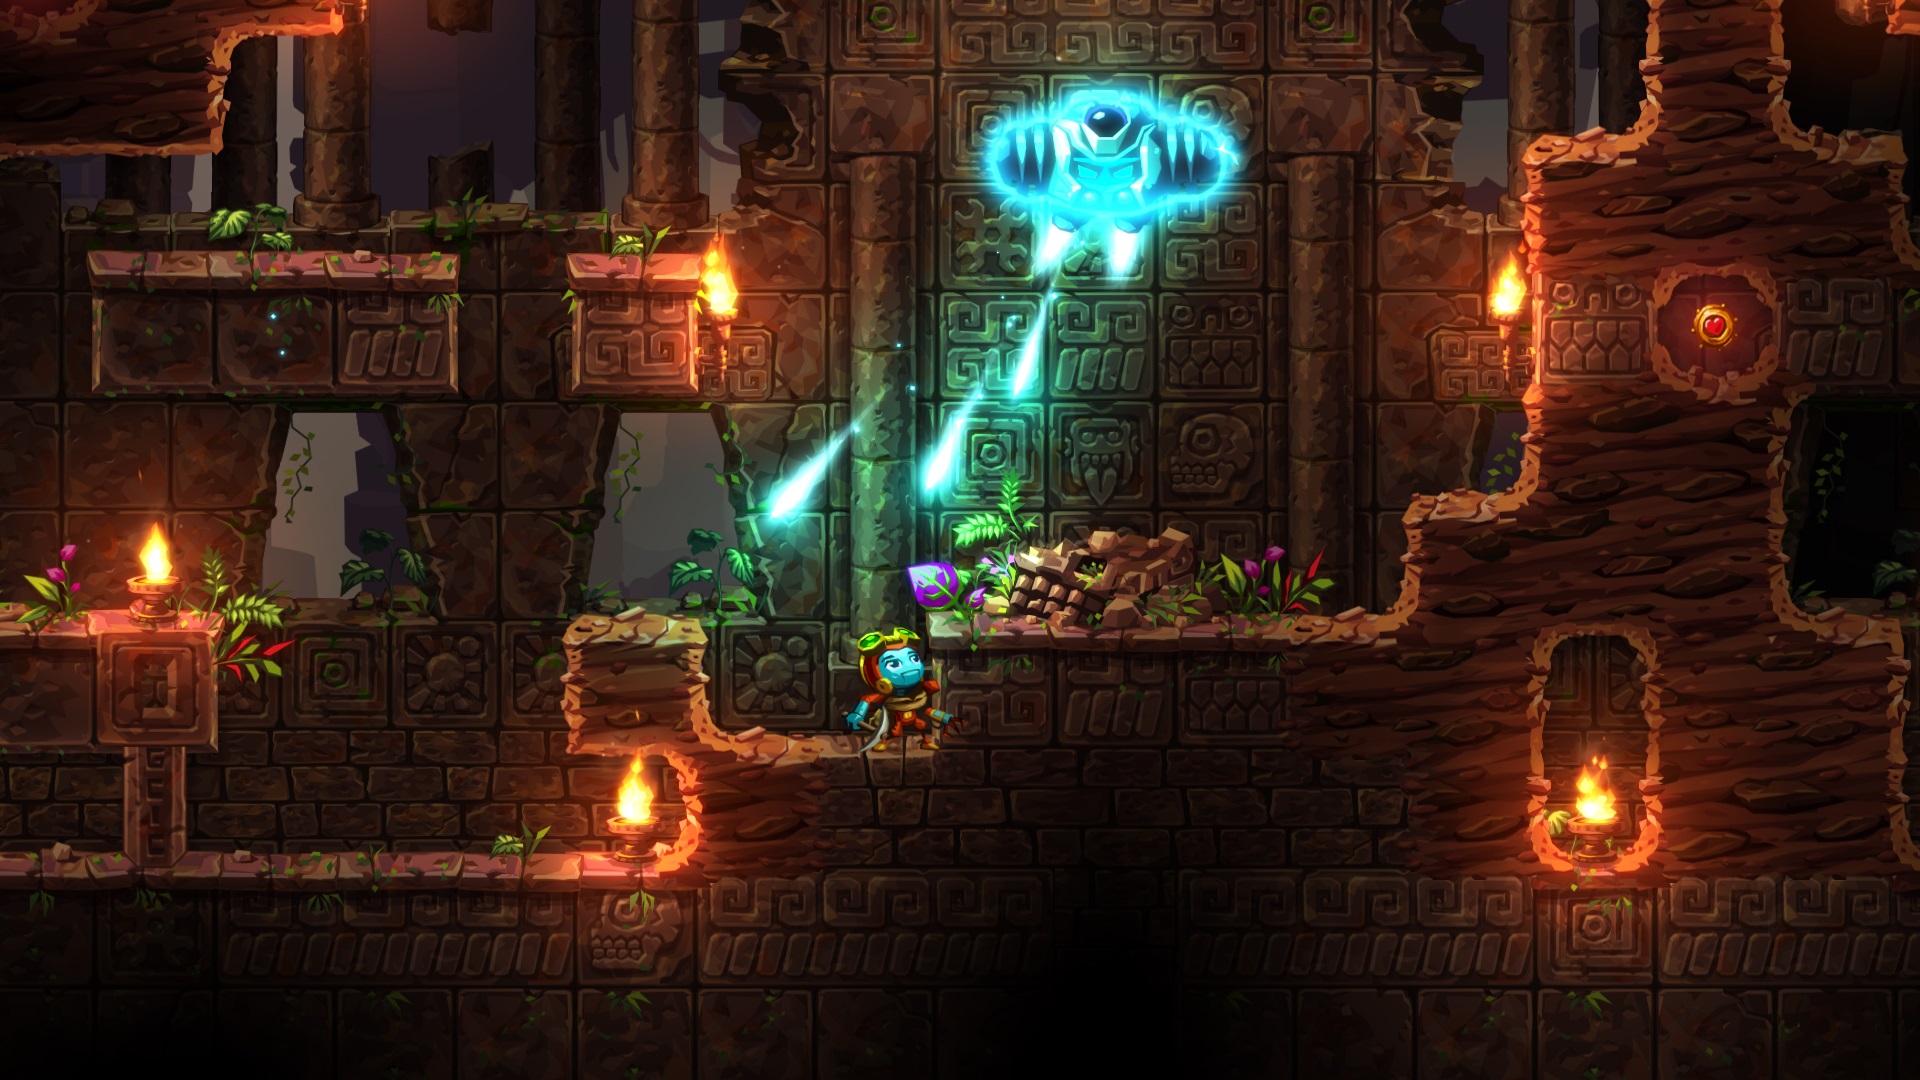 SteamWorld Dig 2 PS4 and PS Vita Release Dates Confirmed for September